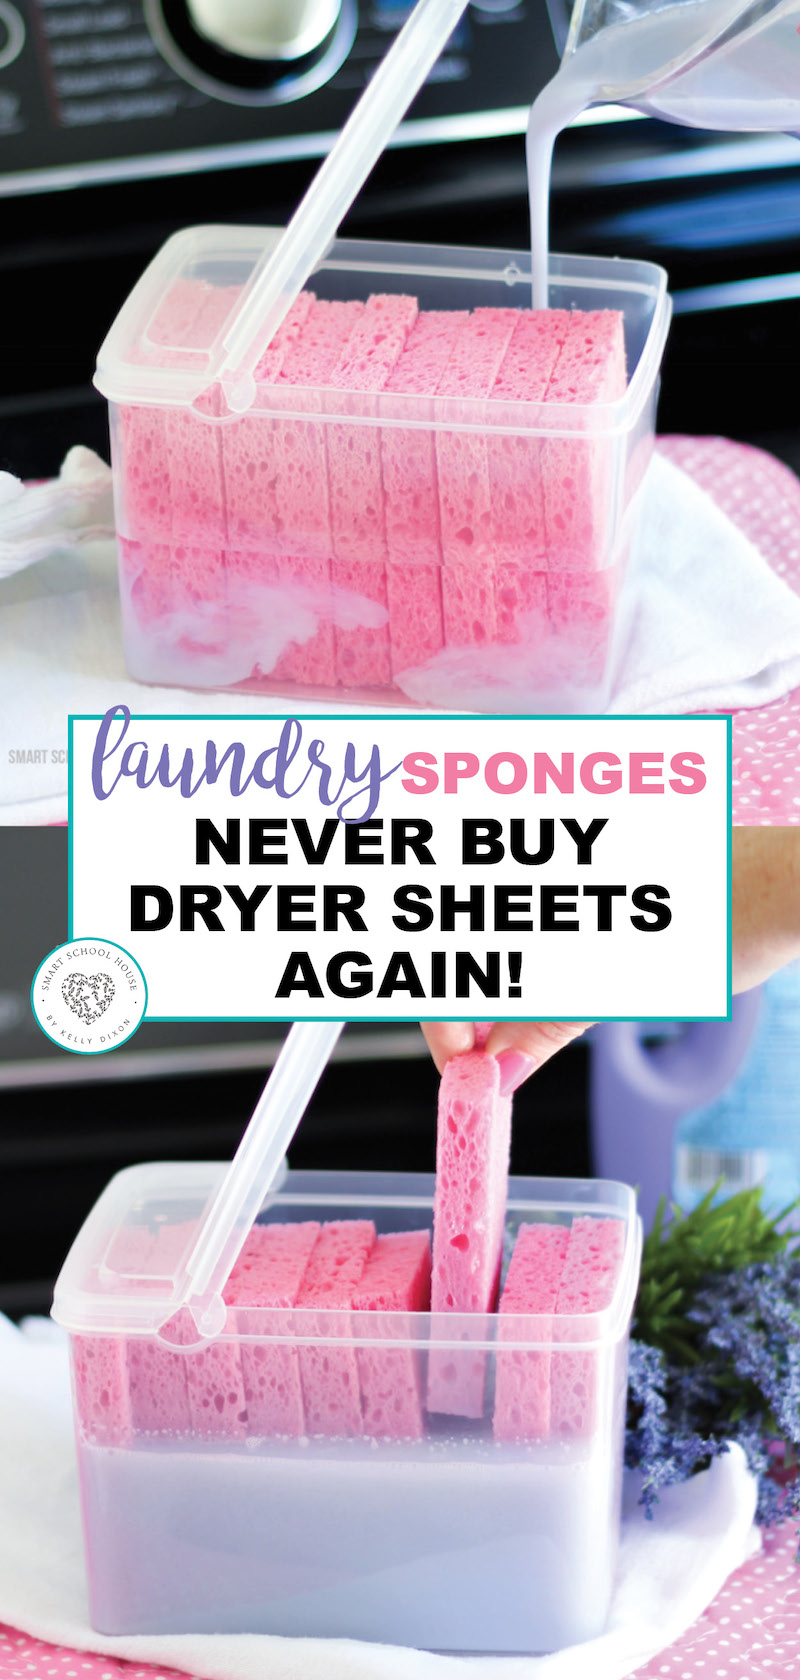 Who doesn't love the smell of lavender and saving money. Learn how to make lavender laundry sponges. You will never have to buy dryer sheets again. It will soften your clothes and make them smell great. Try making these today. BONUS: printable label included. #lavender #fabricsoftener #lavendersponges #laundry #diyfabricsoftener #easy #diydryersheets #smartschoolhouse